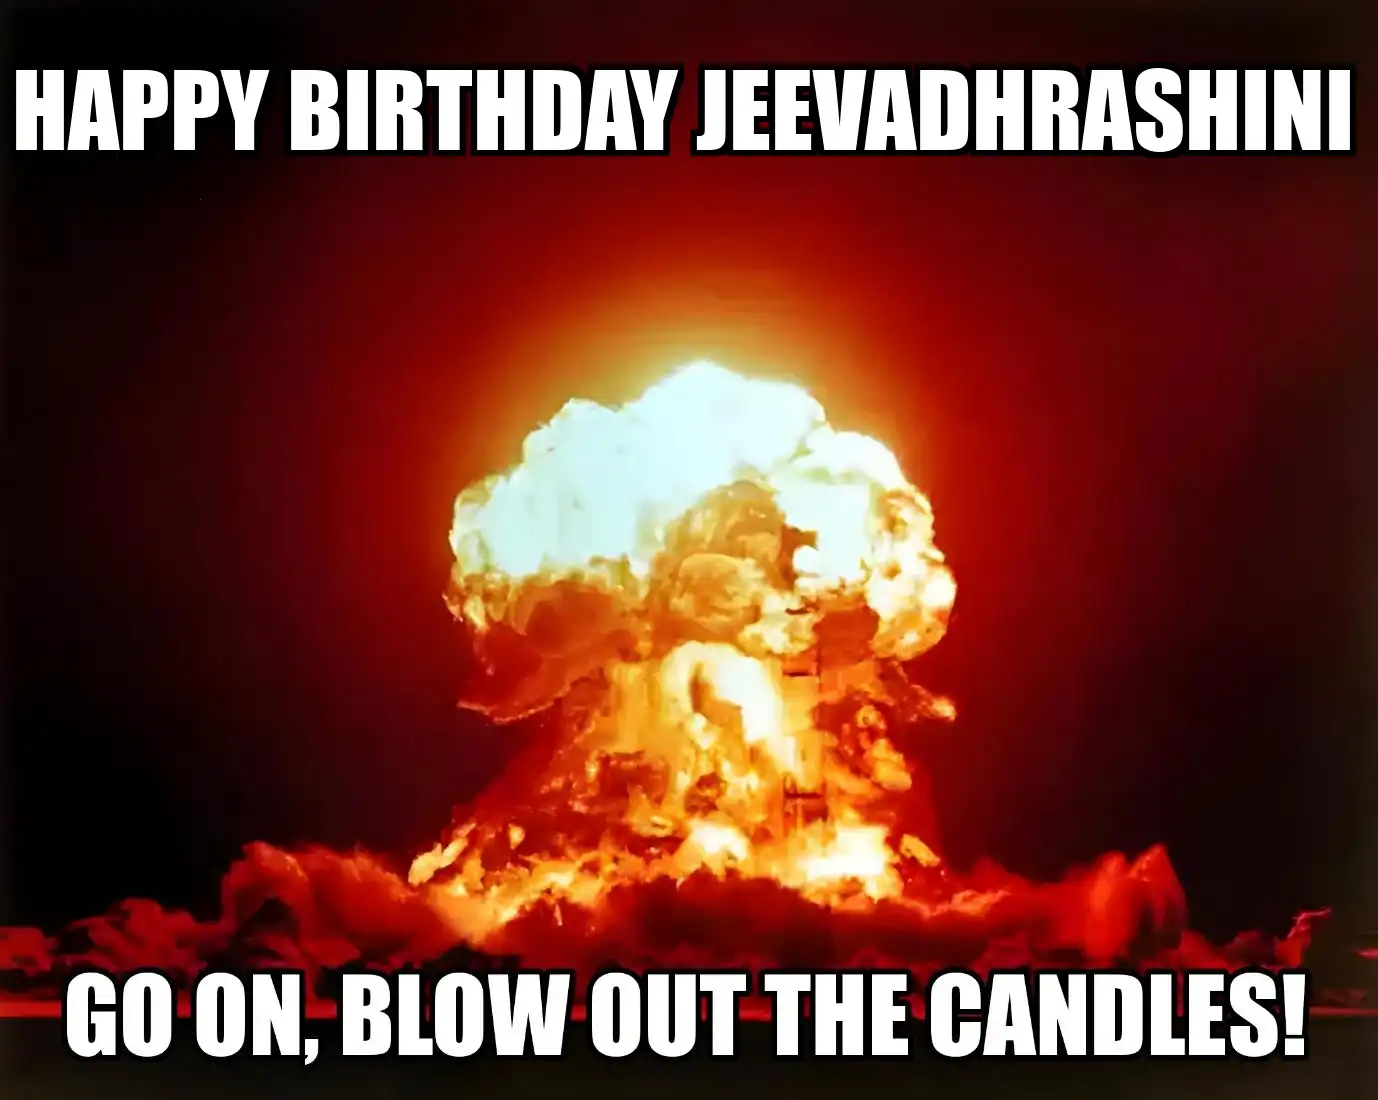 Happy Birthday Jeevadhrashini Go On Blow Out The Candles Meme